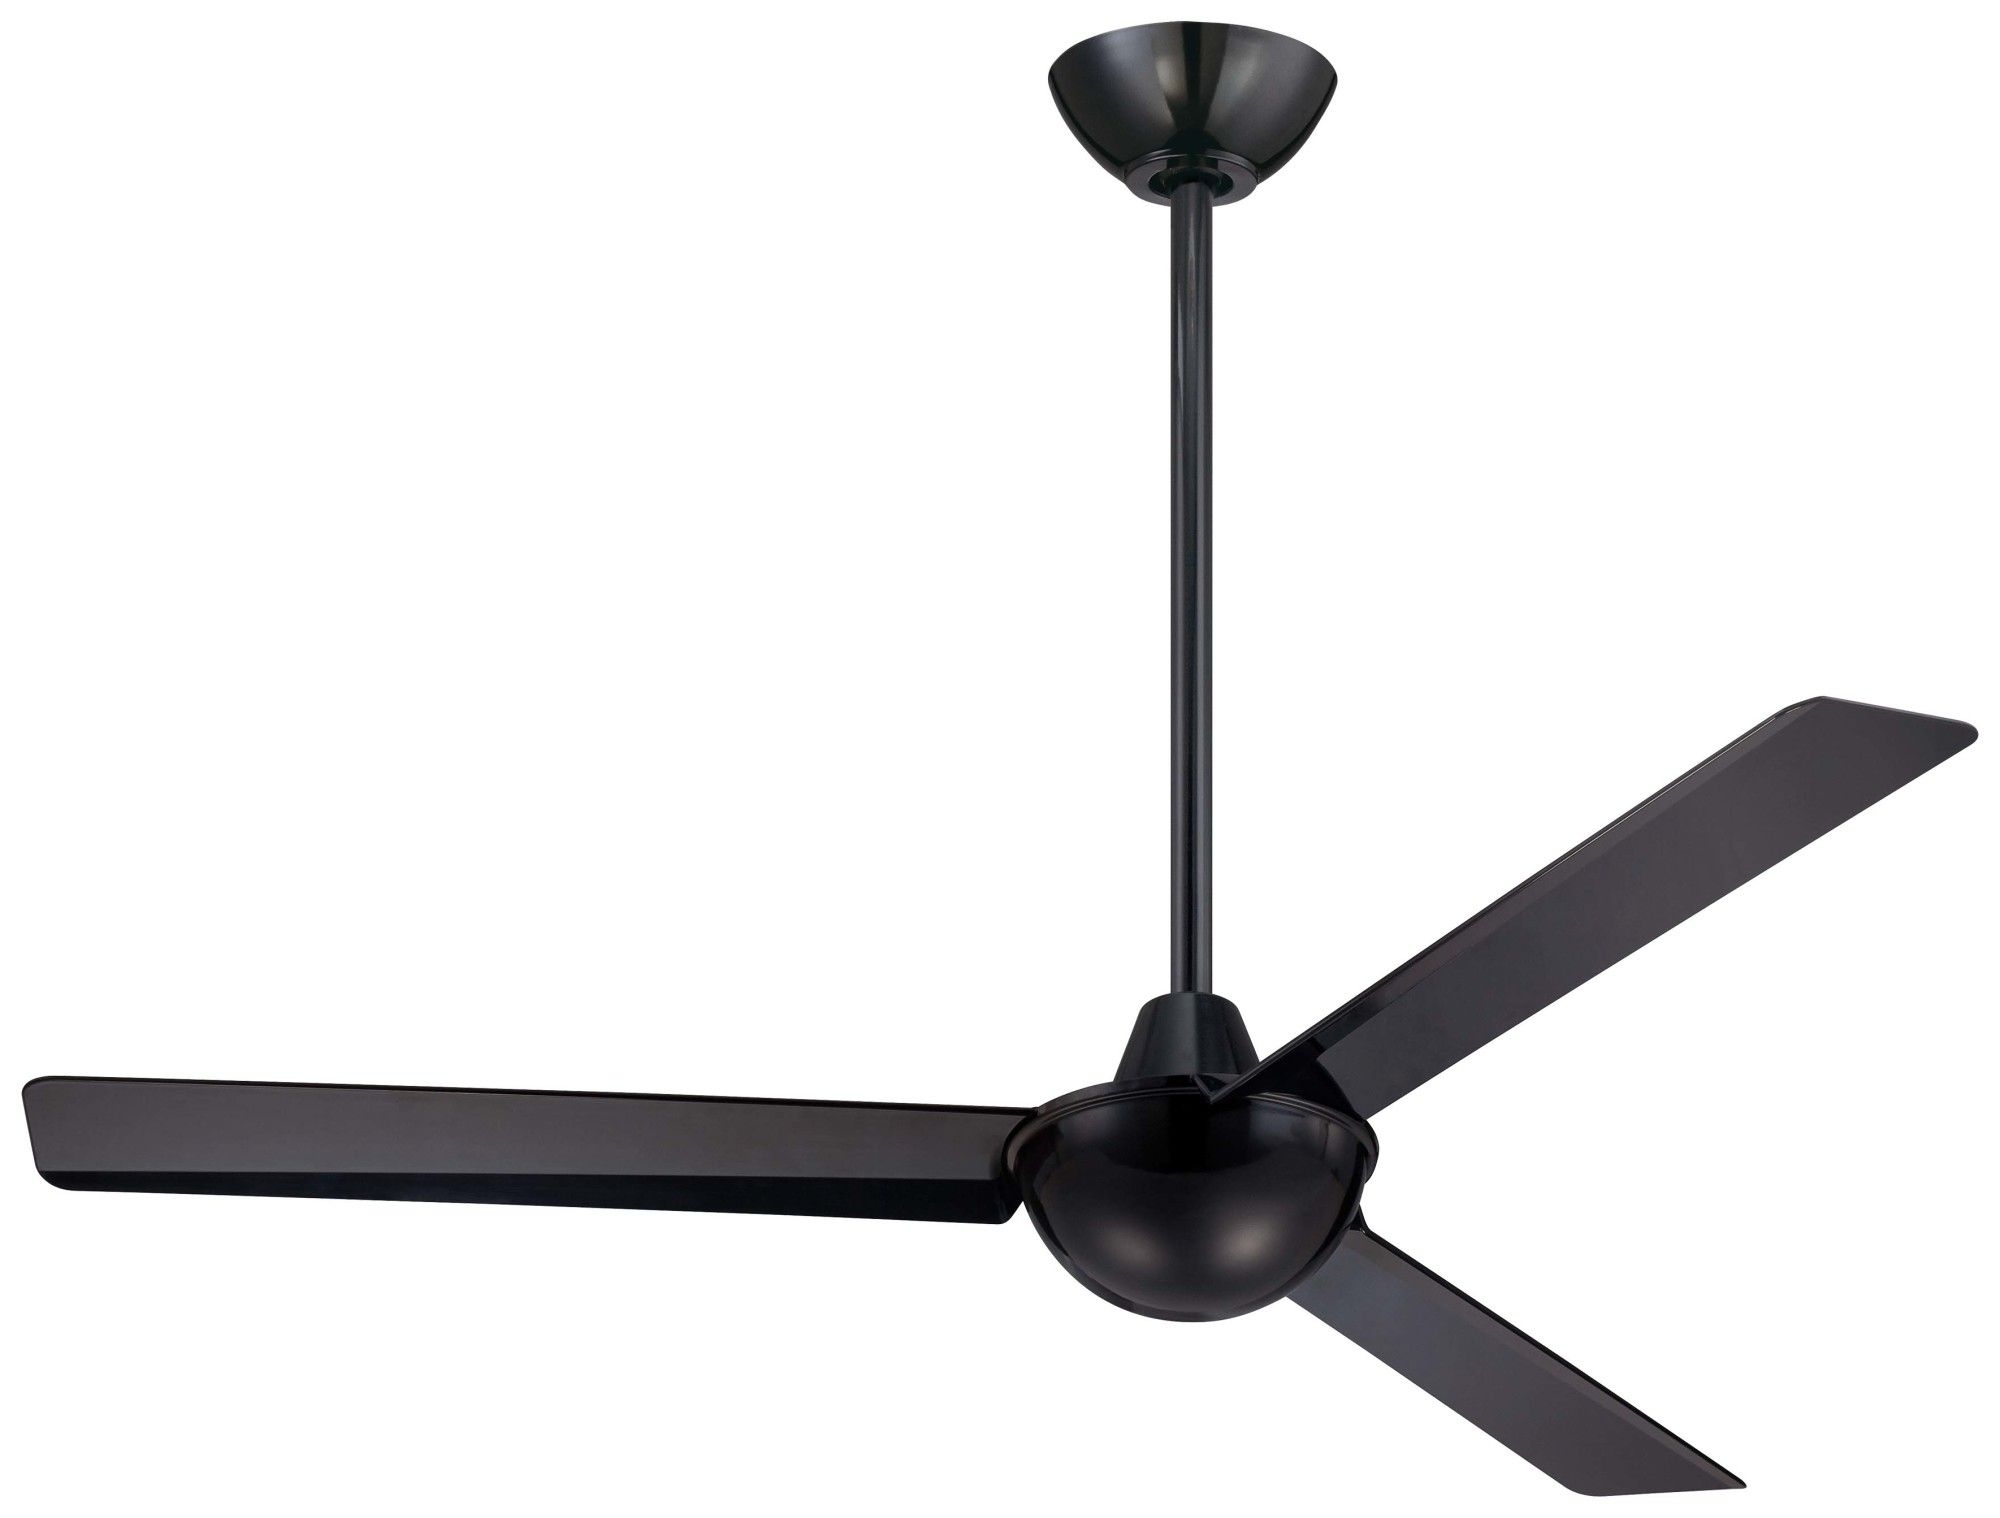 Most Recently Released Kewl 3 Blade Ceiling Fans In Details About Minkaaire F833 Rd 52" 3 Blade Kewl Indoor Ceiling Fan W/wall  Control & Blades (View 2 of 20)